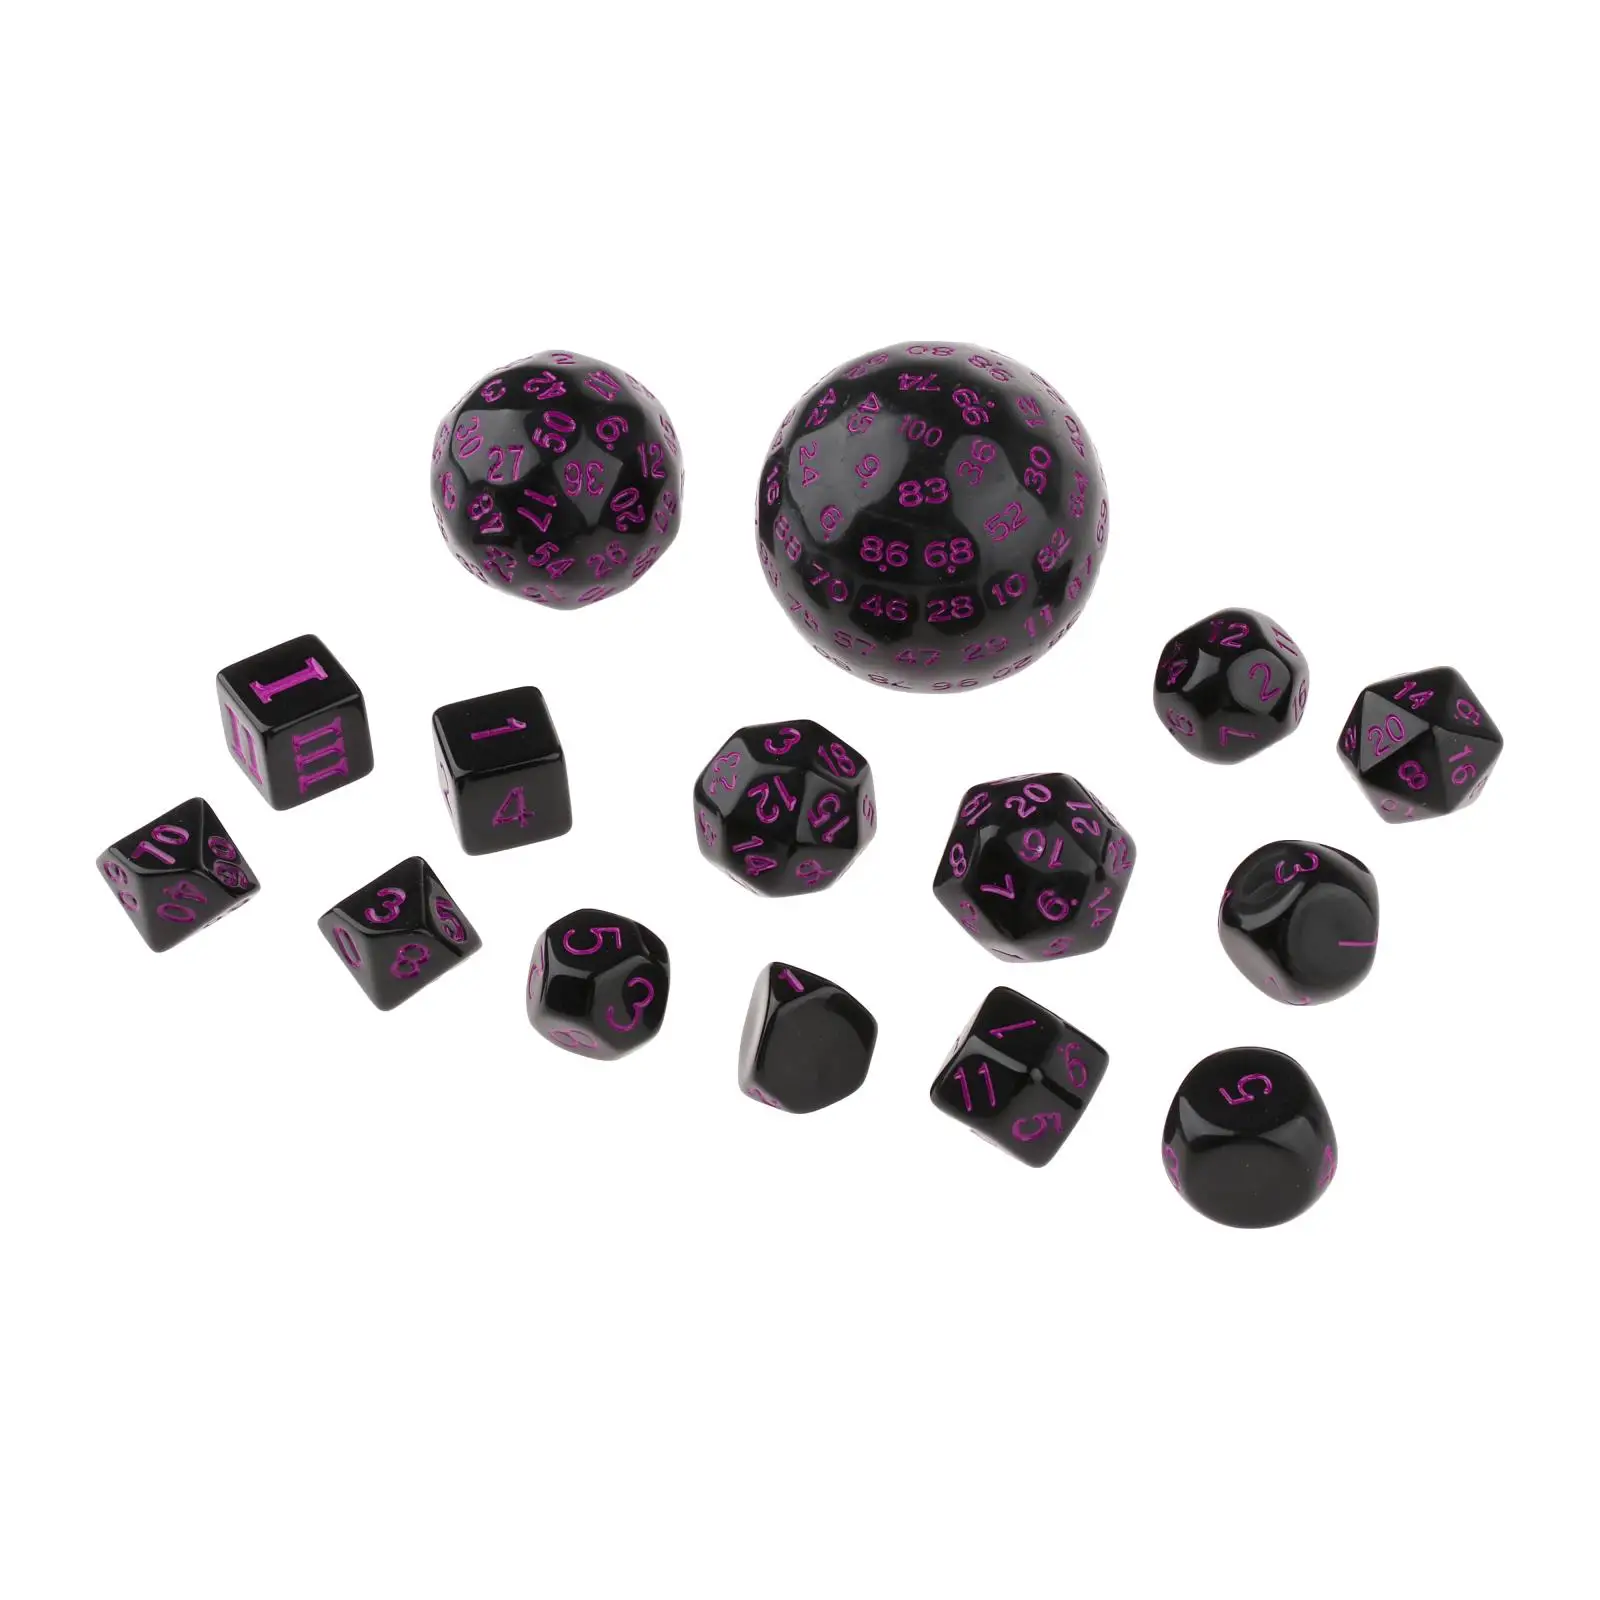 15 PCS Multi Side Digital Dice Set D100 D60 D30 D24 D20 D16 D12 D10 D8 D7 D5 D4 for Role Play Casino Board Game